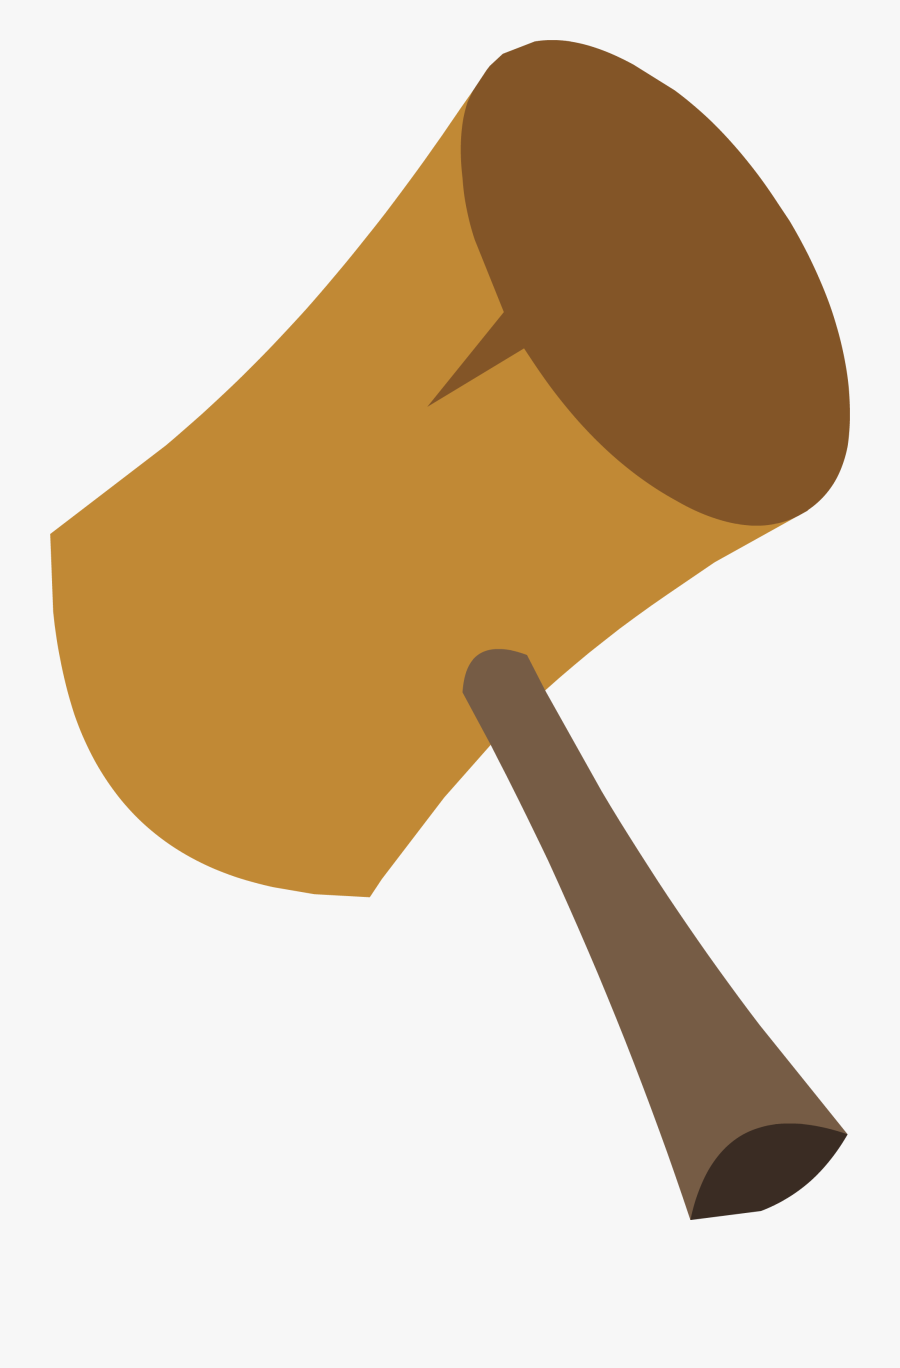 Hammer Animation Png, Transparent Clipart